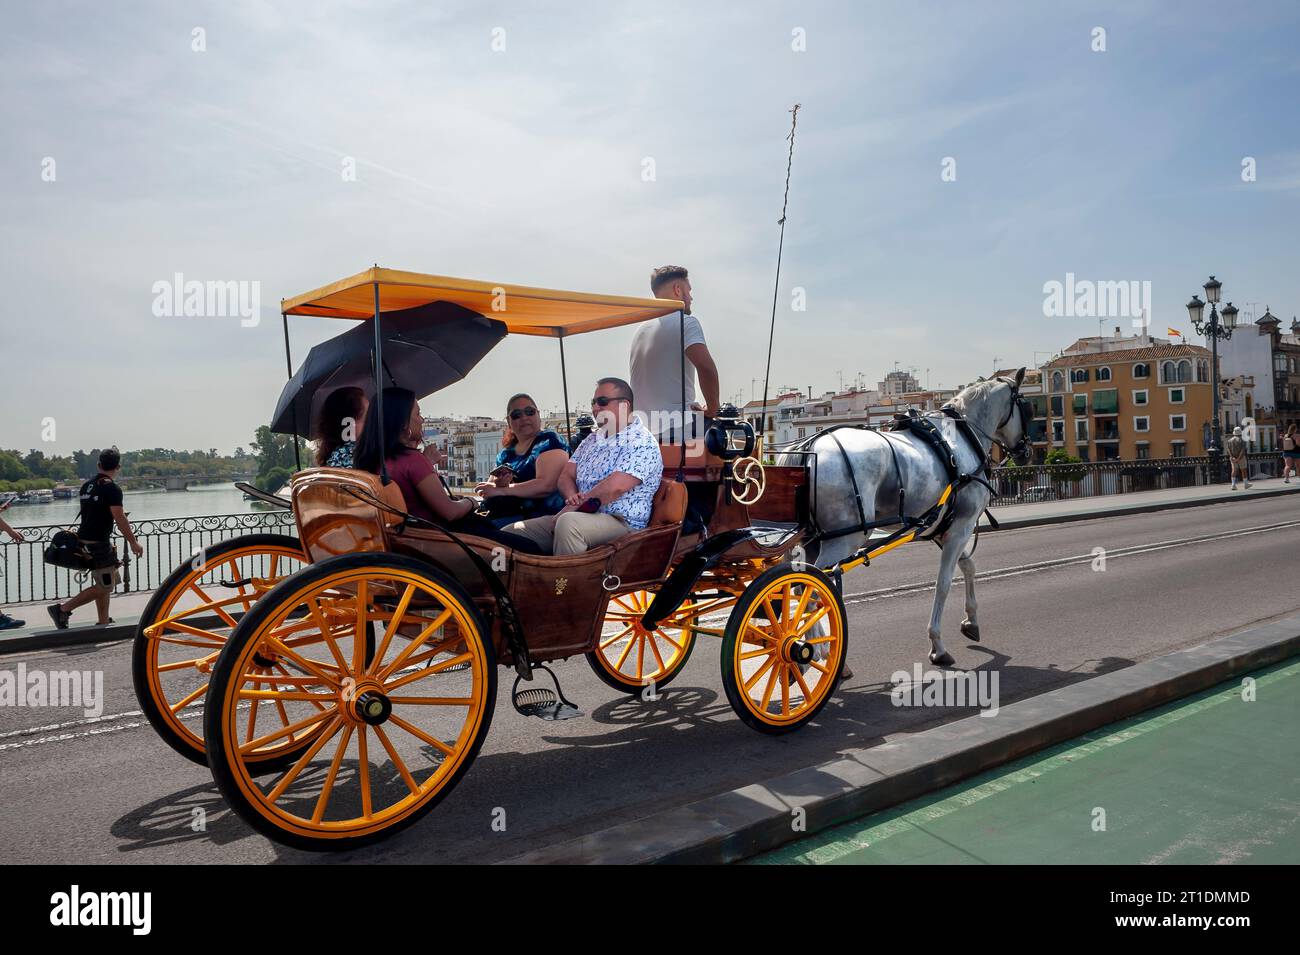 Seville, Spain, Small Group of People, Tourists, Visiting Old City 'Santa Cruz' Neighborhood,in Horse and Buggy Street Scene Stock Photo